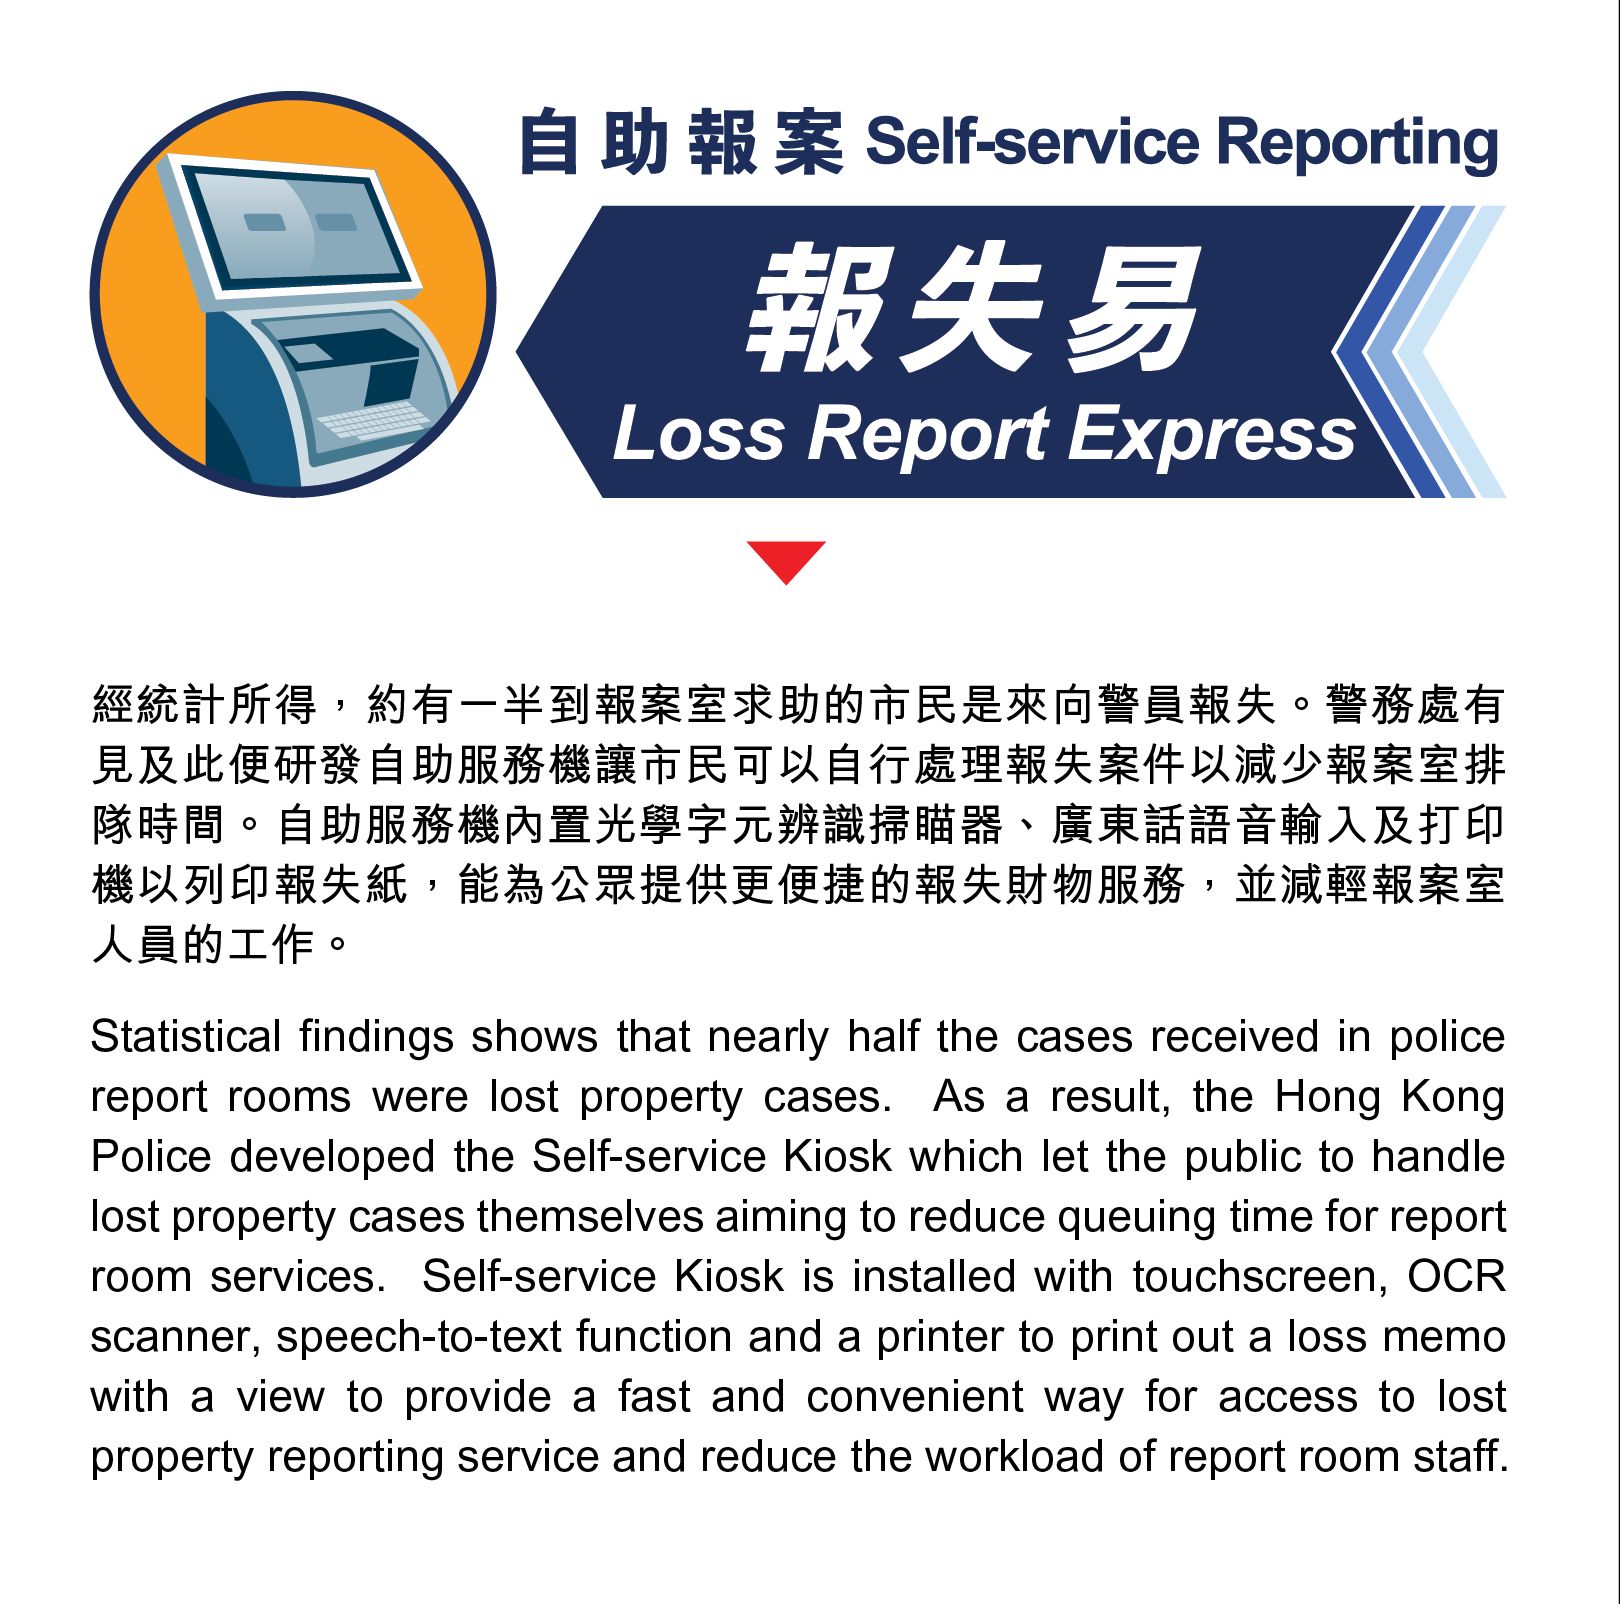 Statistical findings shows that nearly half the cases received in police report rooms were lost property cases.  As a result, the Hong Kong Police developed the Self-service Kiosk which let the public to handle lost property cases themselves aiming to reduce queuing time for report room services.  Self-service Kiosk is installed with touchscreen, OCR scanner, speech-to-text function and a printer to print out a loss memo with a view to provide a fast and convenient way for access to lostproperty reporting service and reduce the workload of report room staff.